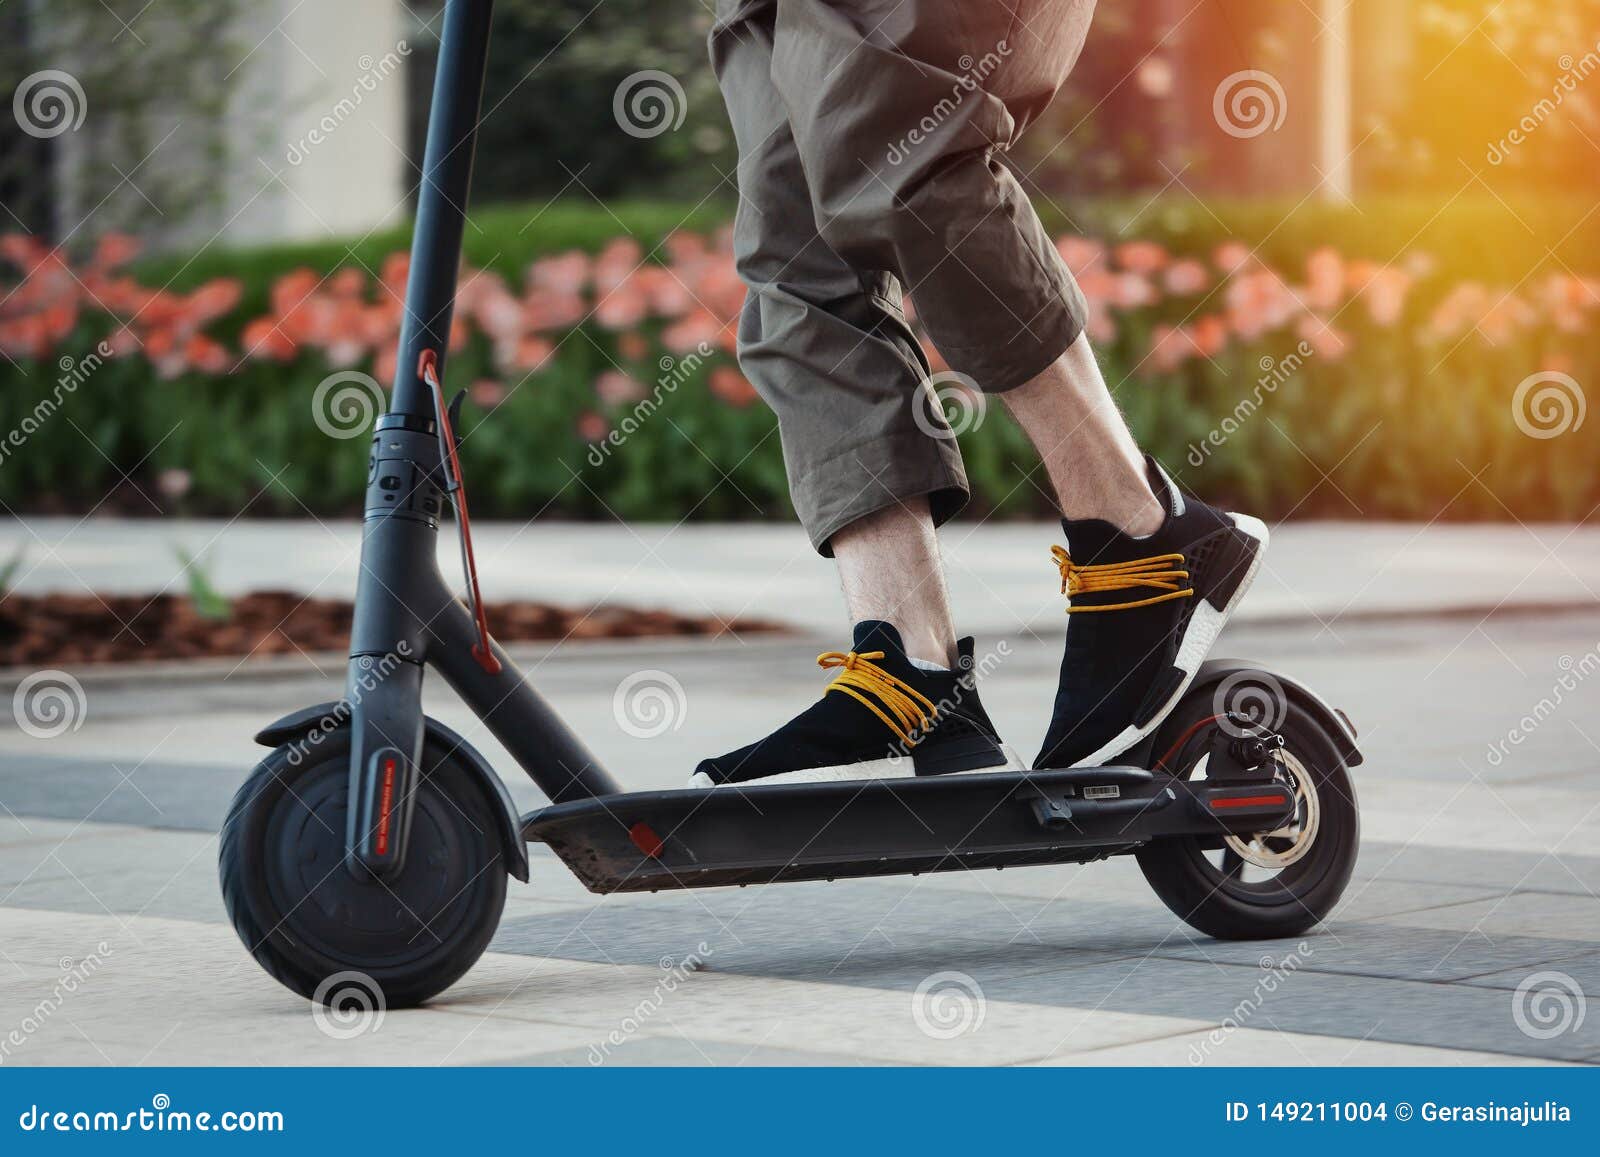 close up of man riding black electric kick scooter at beautiful park landscape